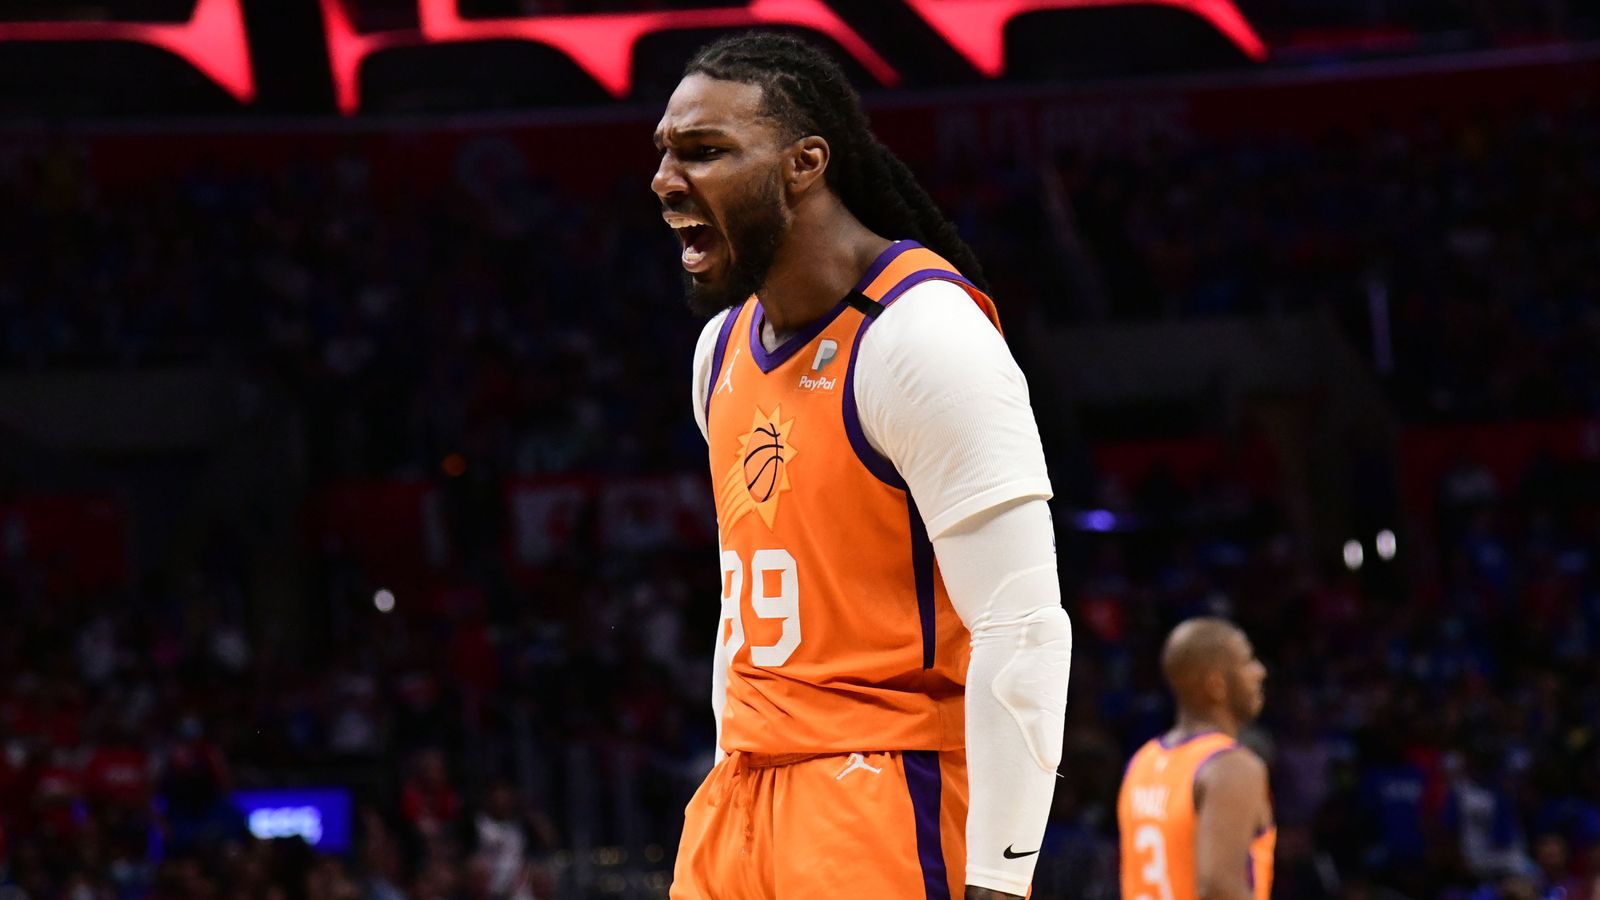 Marquette's Jae Crowder has made NBA Finals with the Heat and Suns